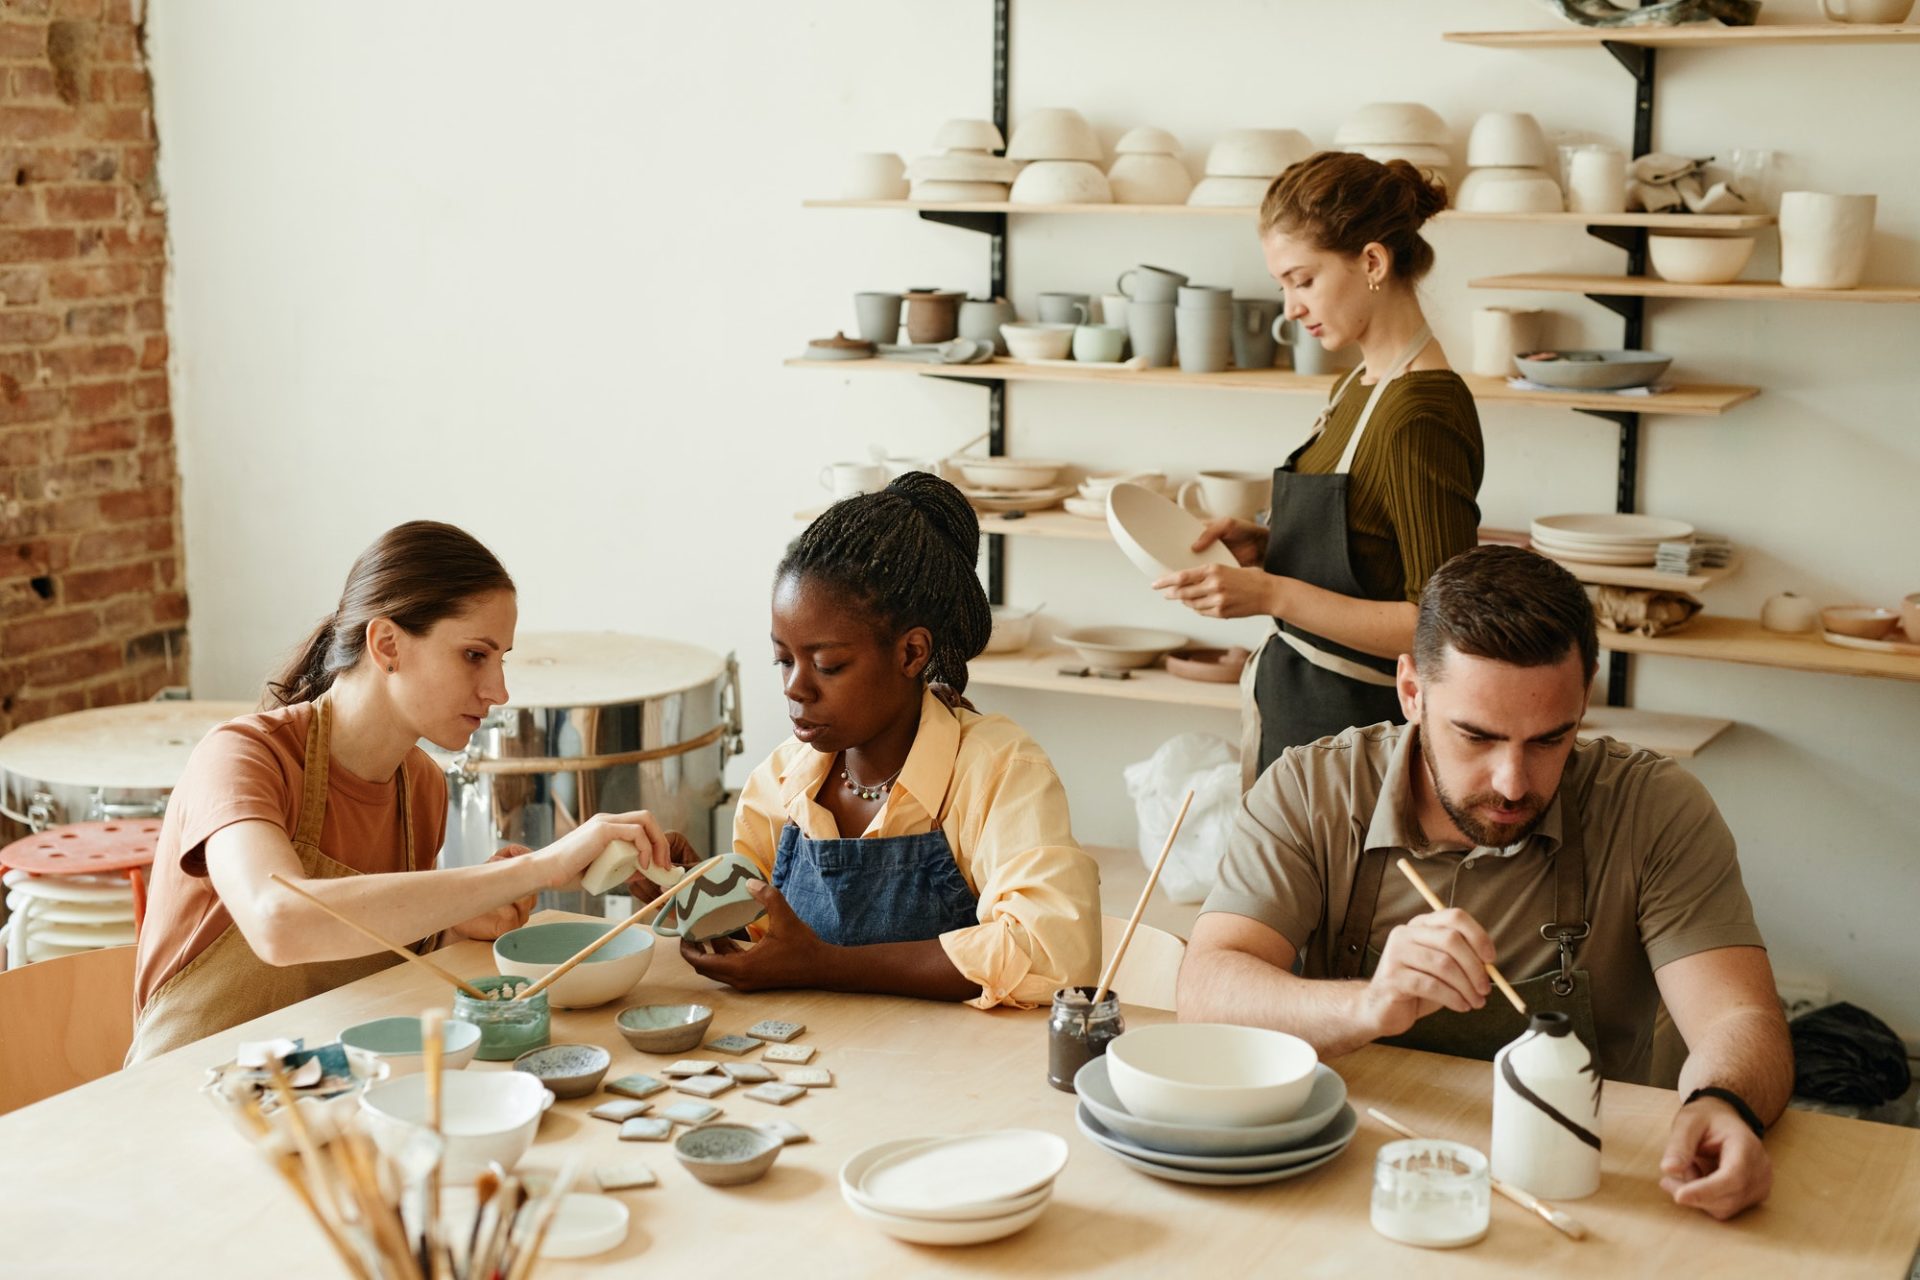 Group of People in Pottery Workshop